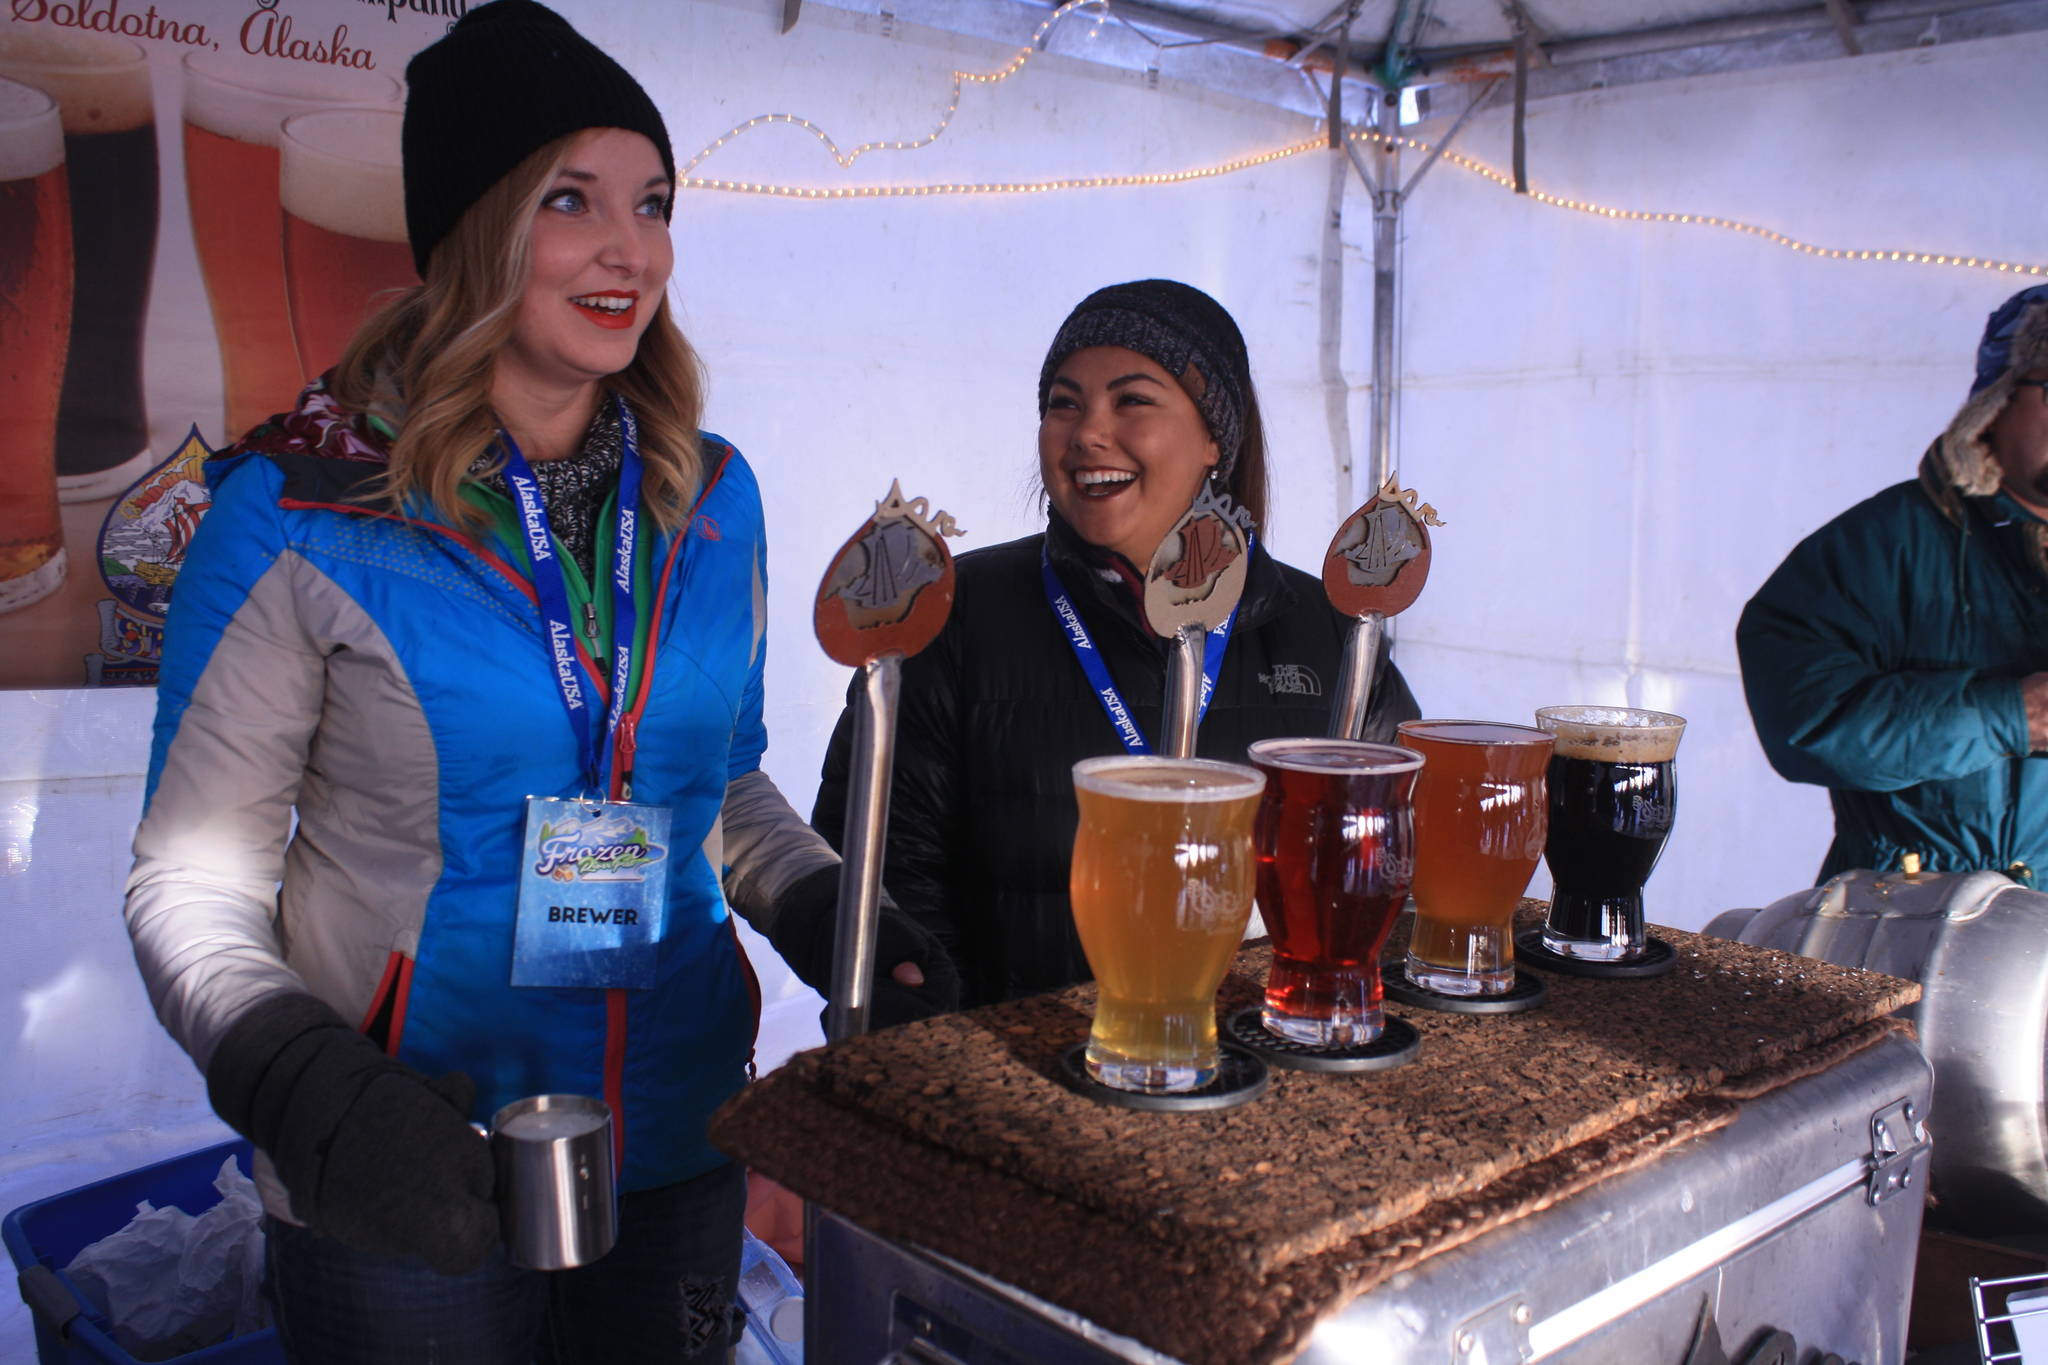 Alaska breweries serve up beers at the Frozen RiverFest in Soldotna, Alaska, in February, 2018. (Photo by Erin Thompson/Peninsula Clarion)